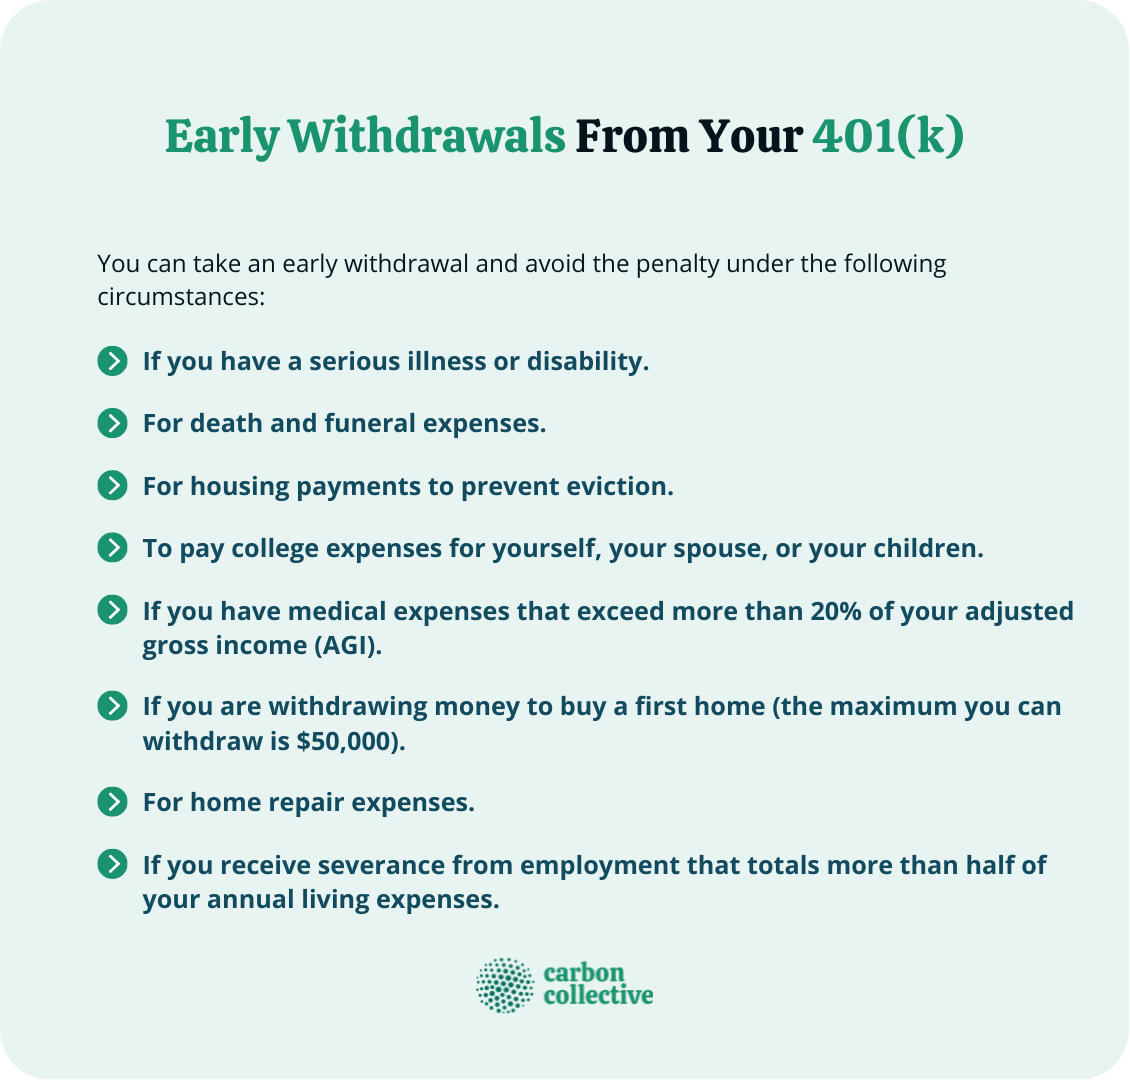 How to Make a Withdrawal From a 401(k) Retirement Plan